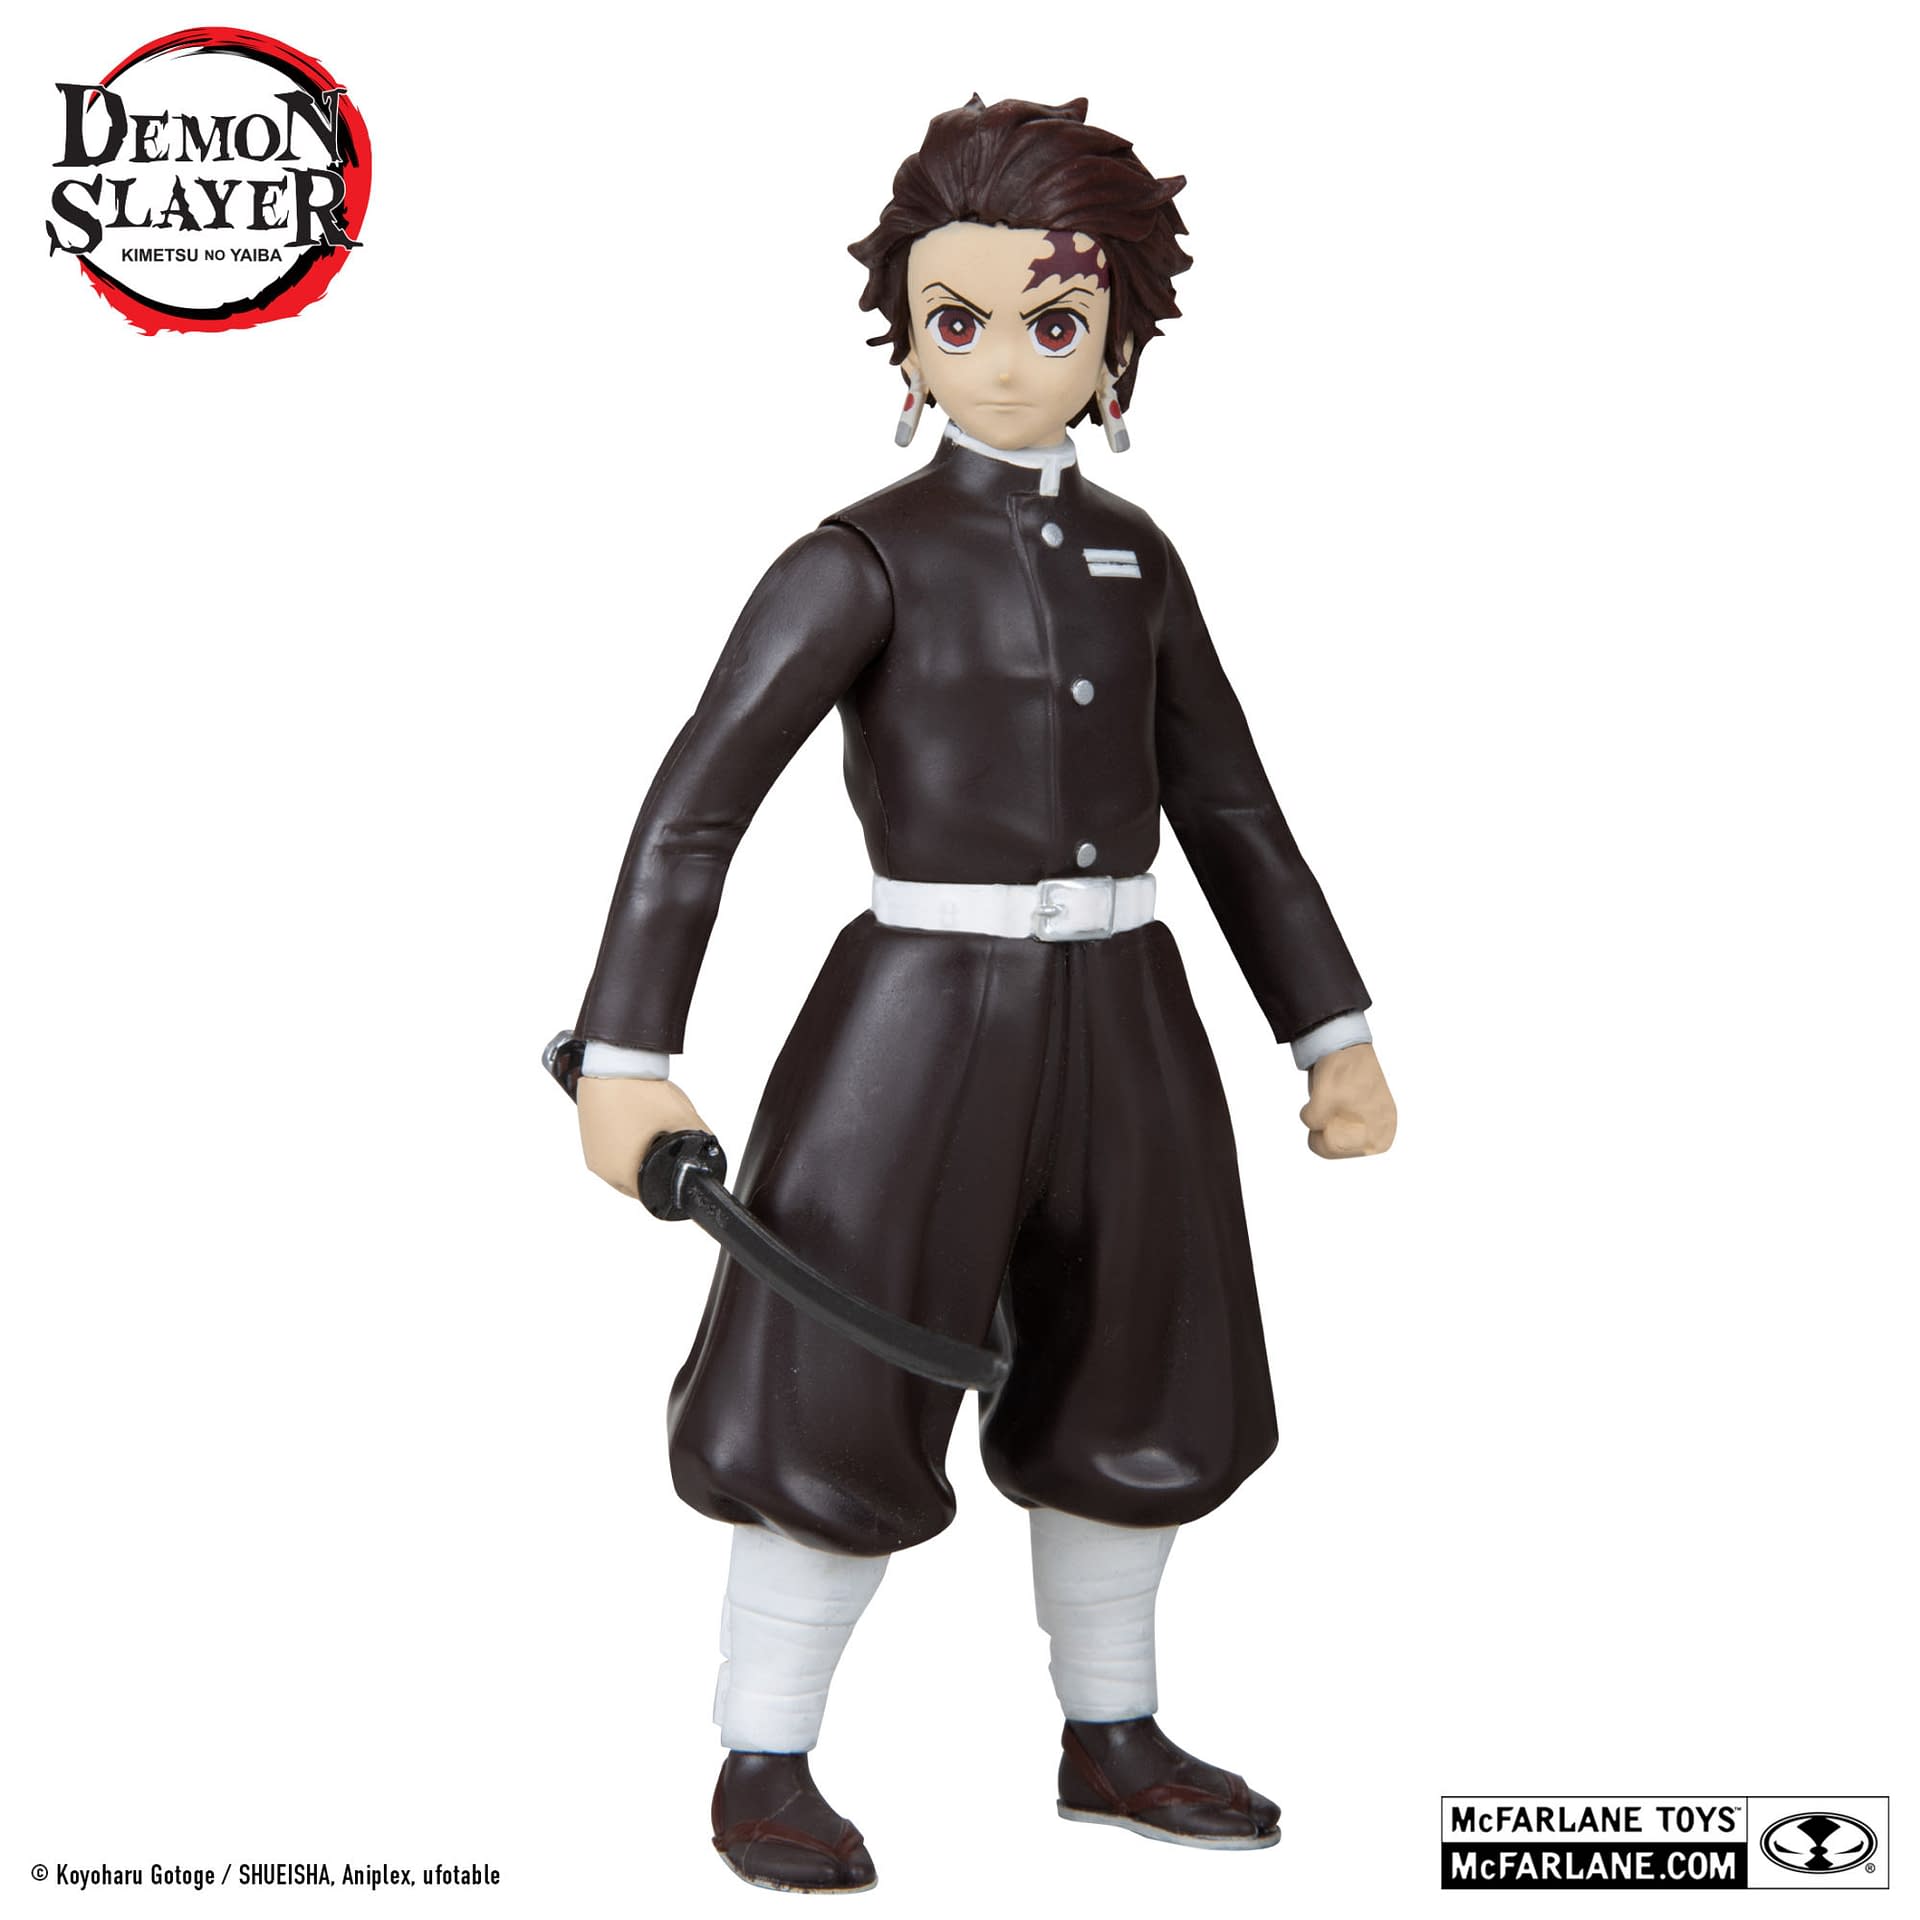 More Demon Slayer Figures Arrive at McFarlane Toys in 5" Scale